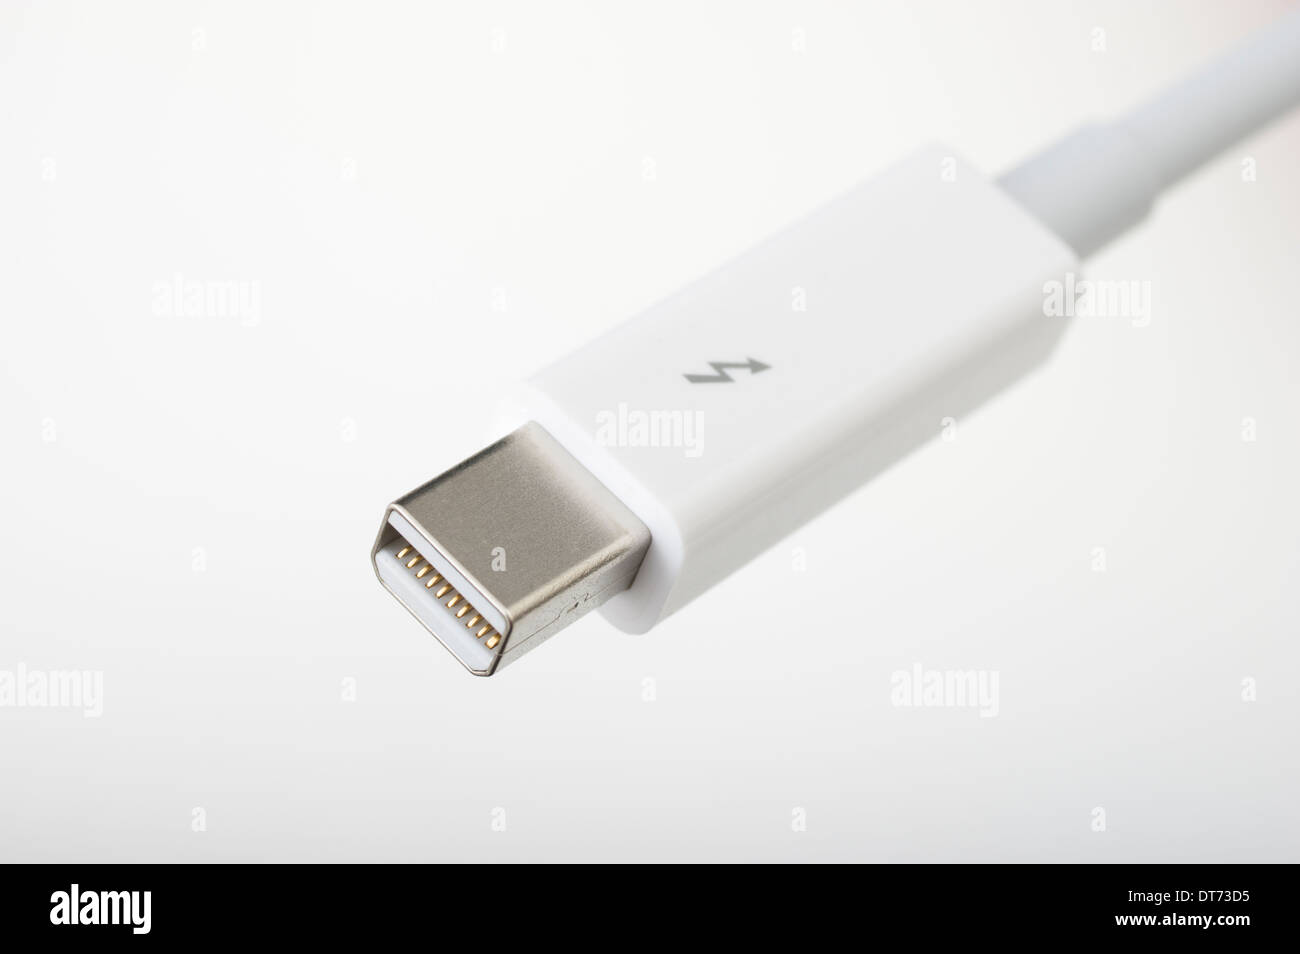 Apple Thunderbolt Cable Stock Photo